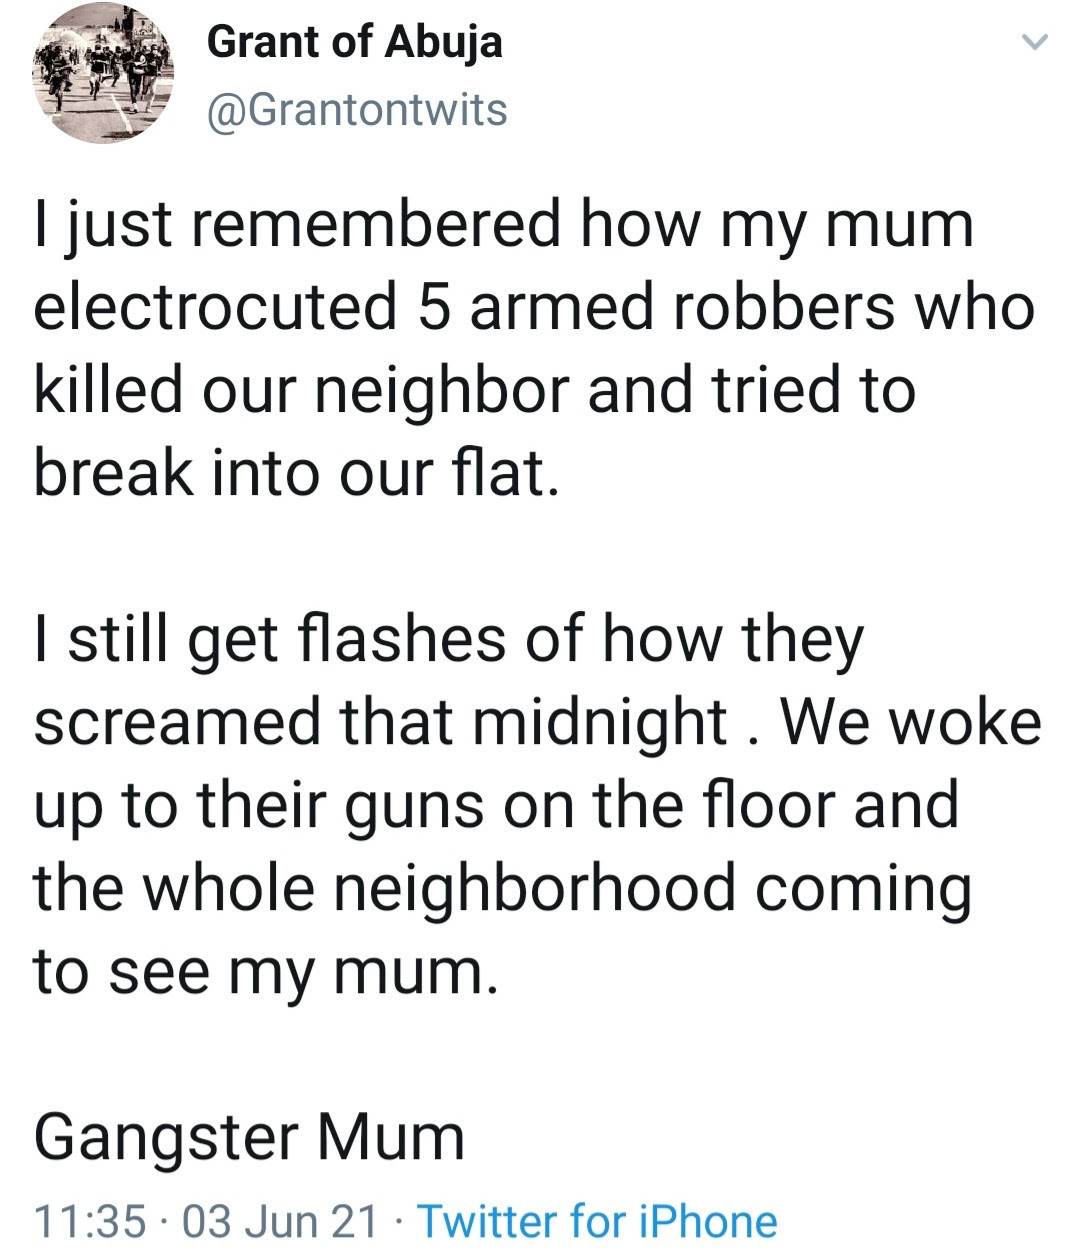 Man recounts how his mother allegedly dealt with armed robbers who tried to break into their house